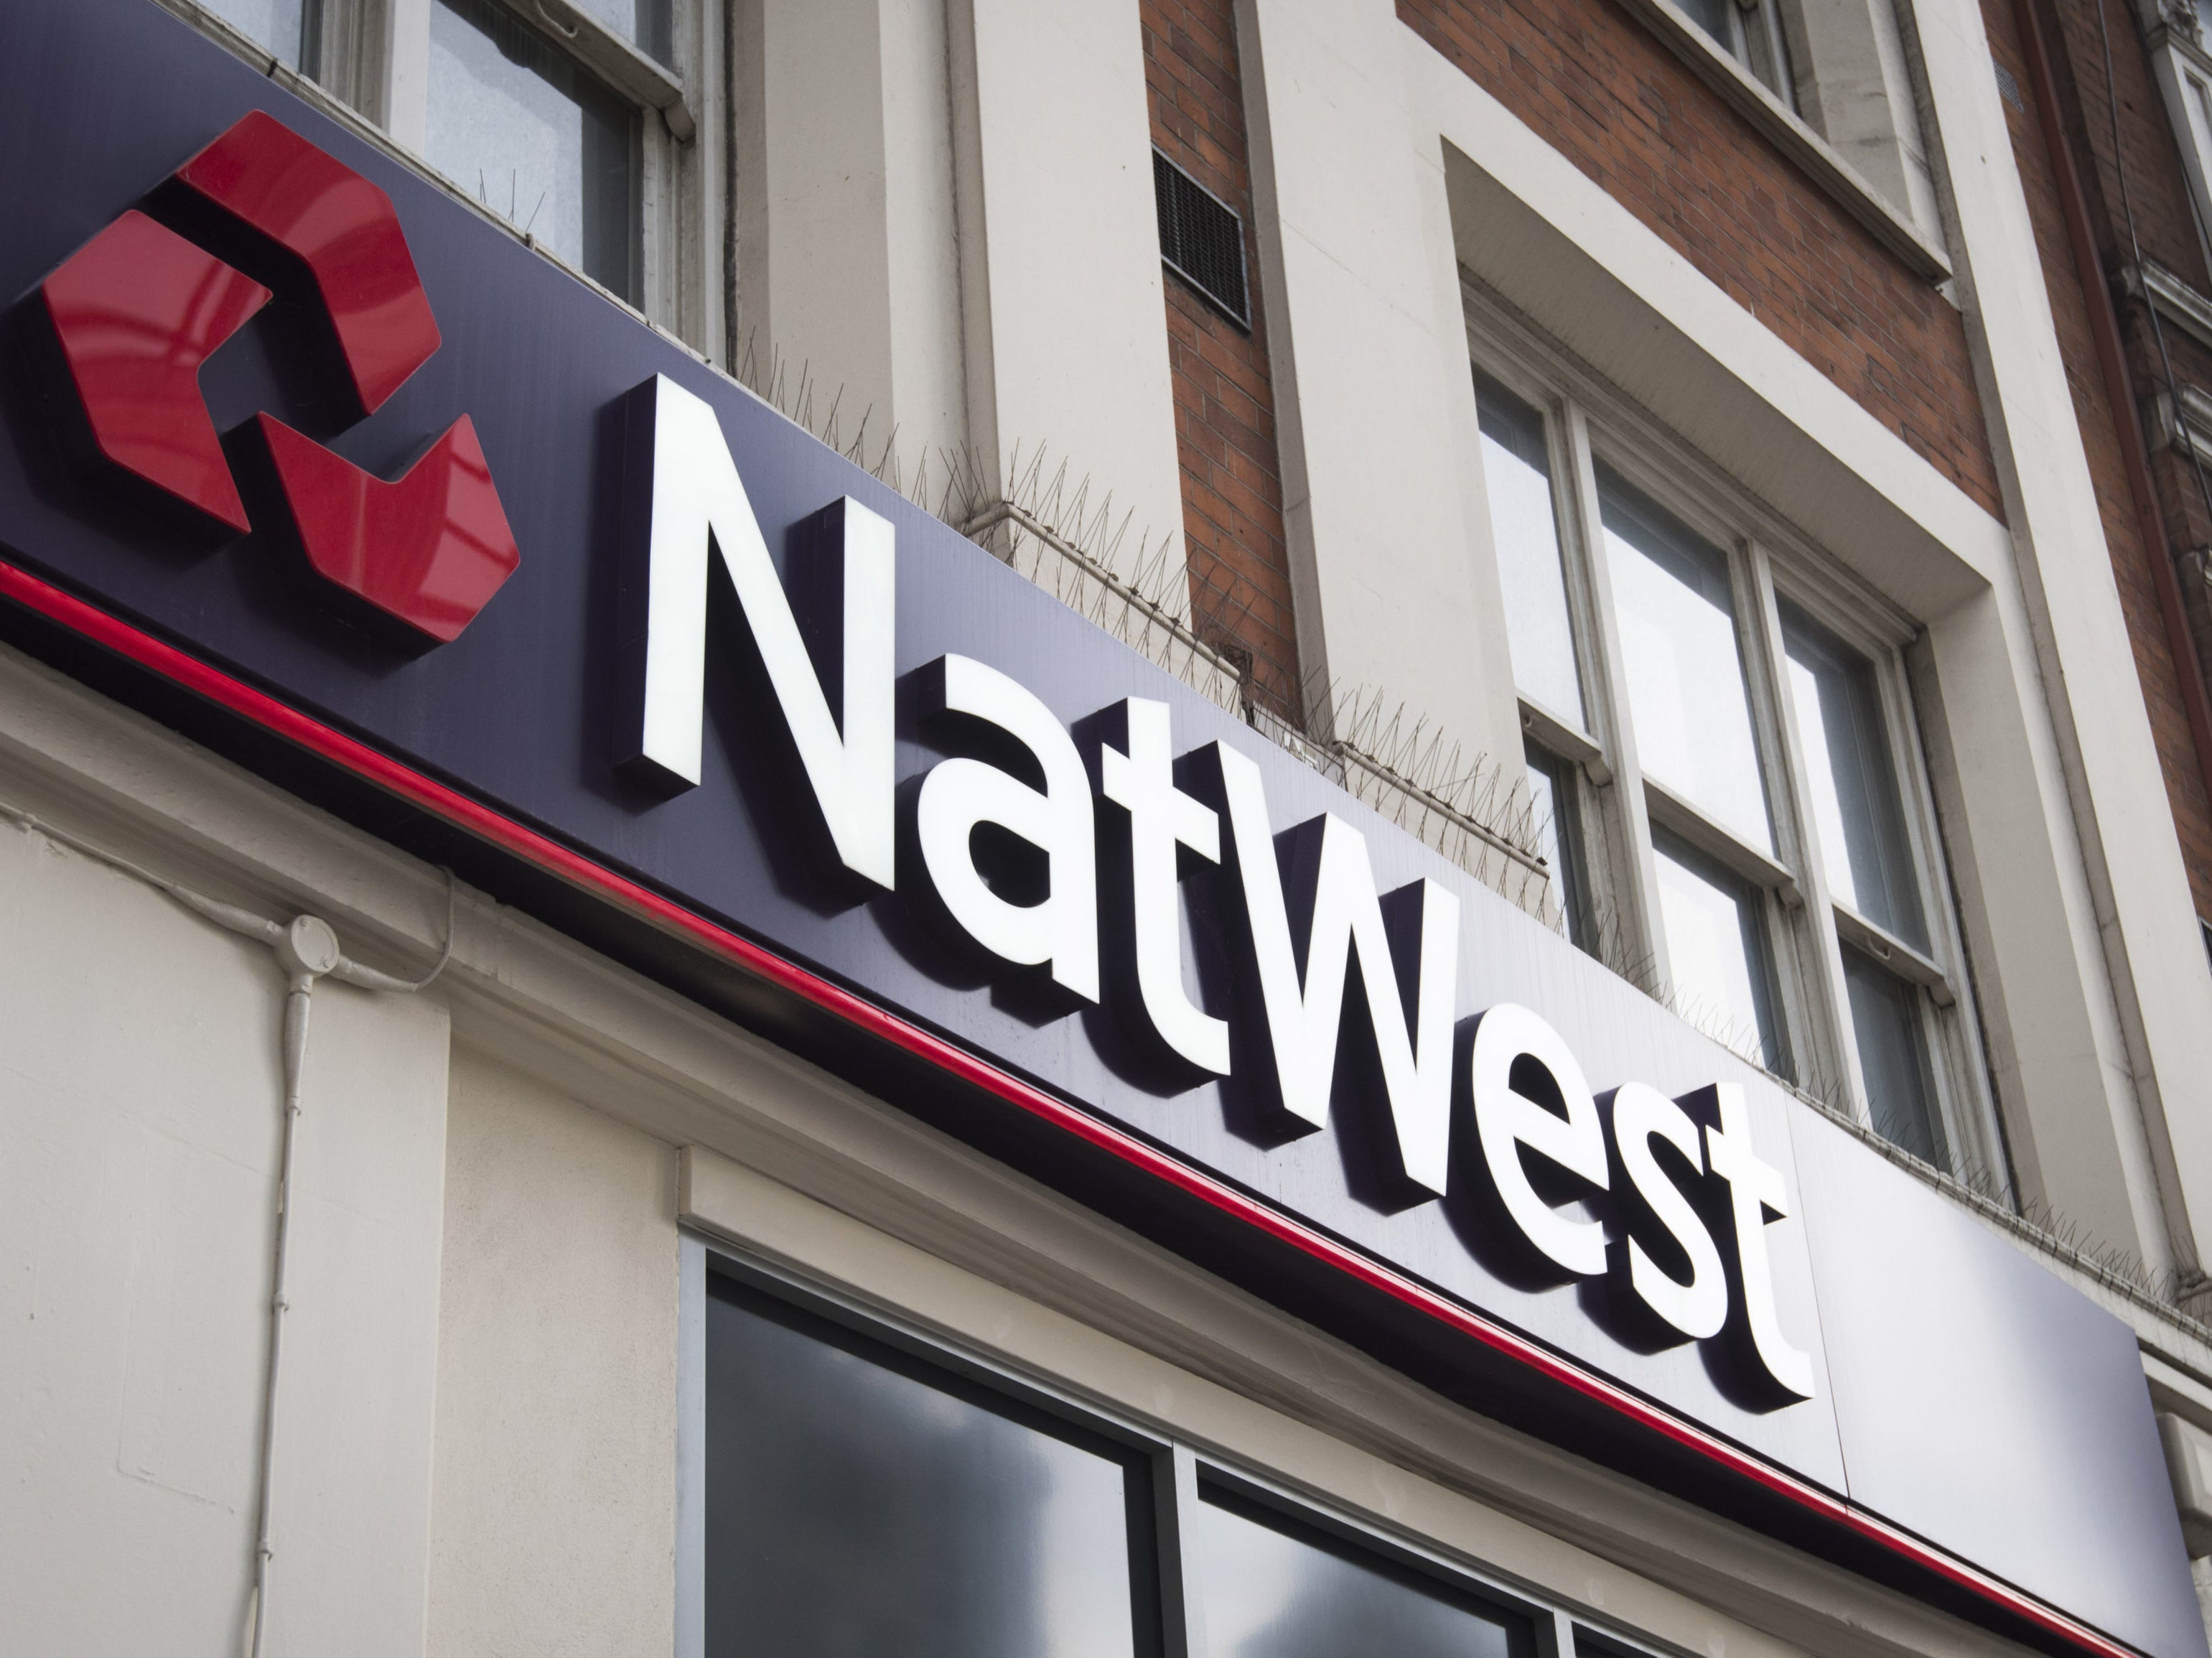 RBS changed its name to NatWest after being involved in multiple scandals